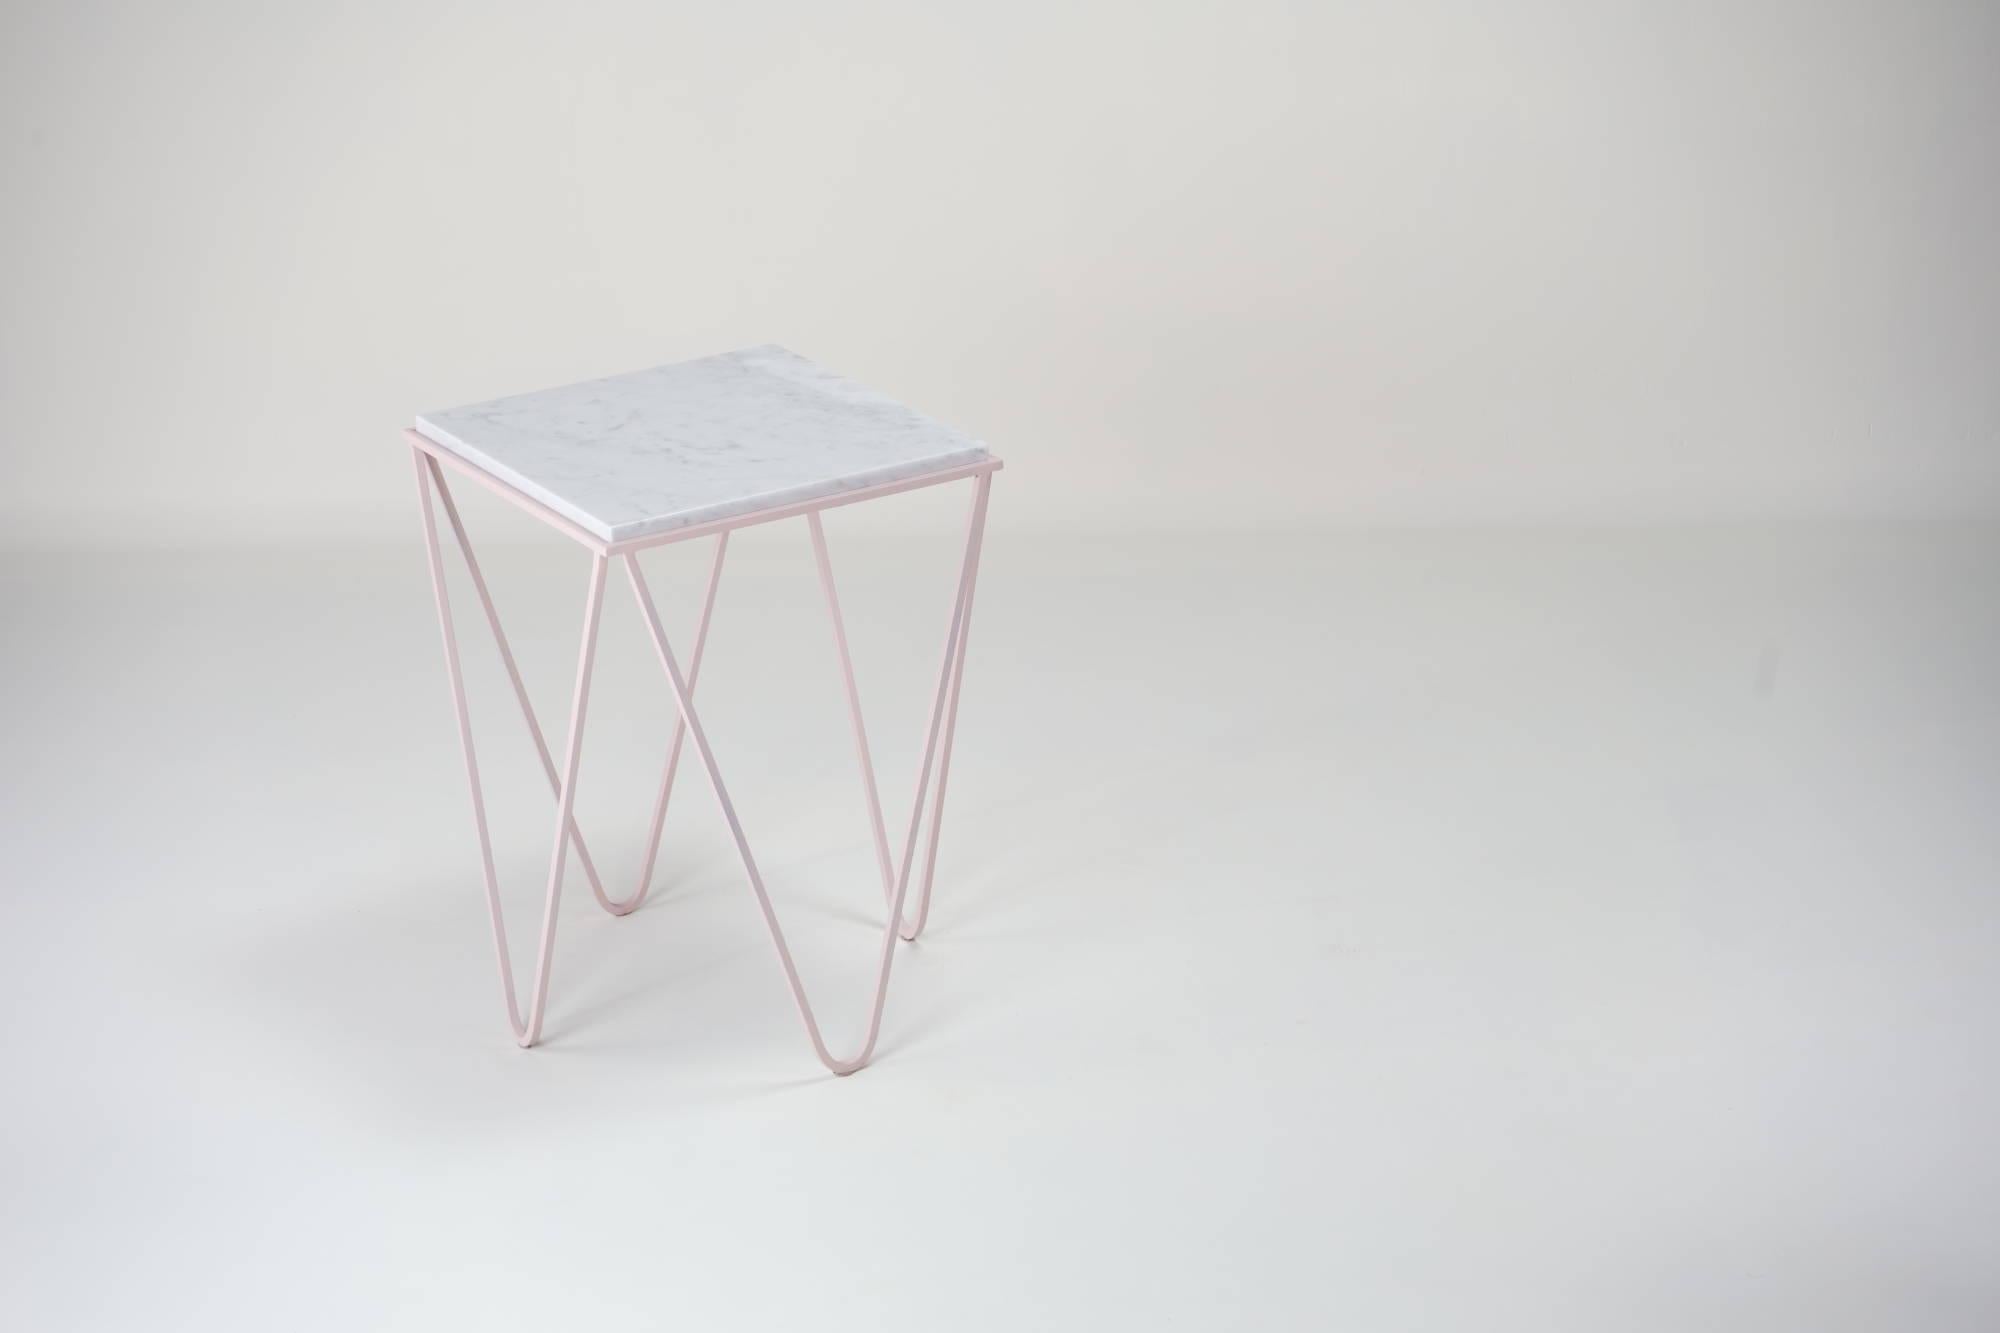 Avior is an evolution of the Gravity side table. We decided to keep the same concept of lightness and movement, abstracting the motion of the flying Cararra marble into a different 3D iron structure. 

The geometry was achieved through playful